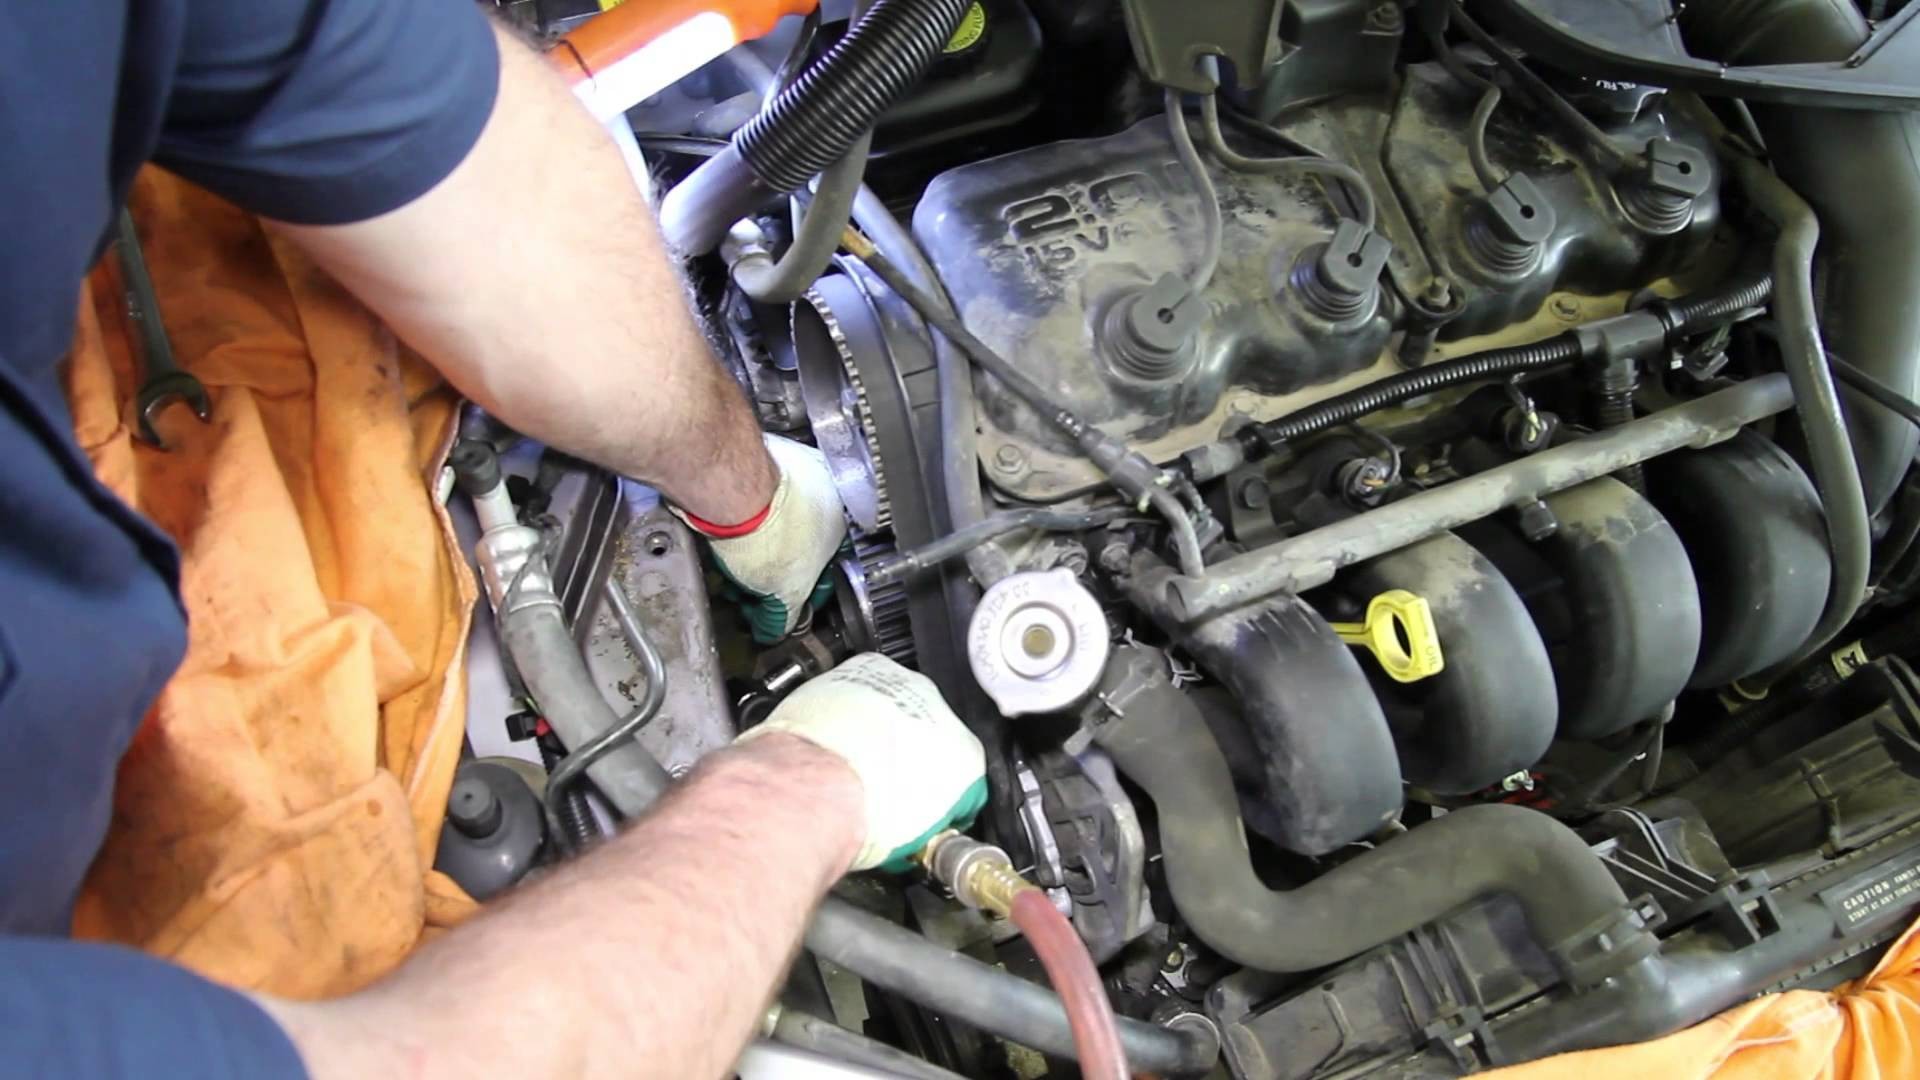 2002 Dodge Neon Engine Diagram Wpk 0039 Awk1253 How to Install A Water Pump and Timing Kit Dodge